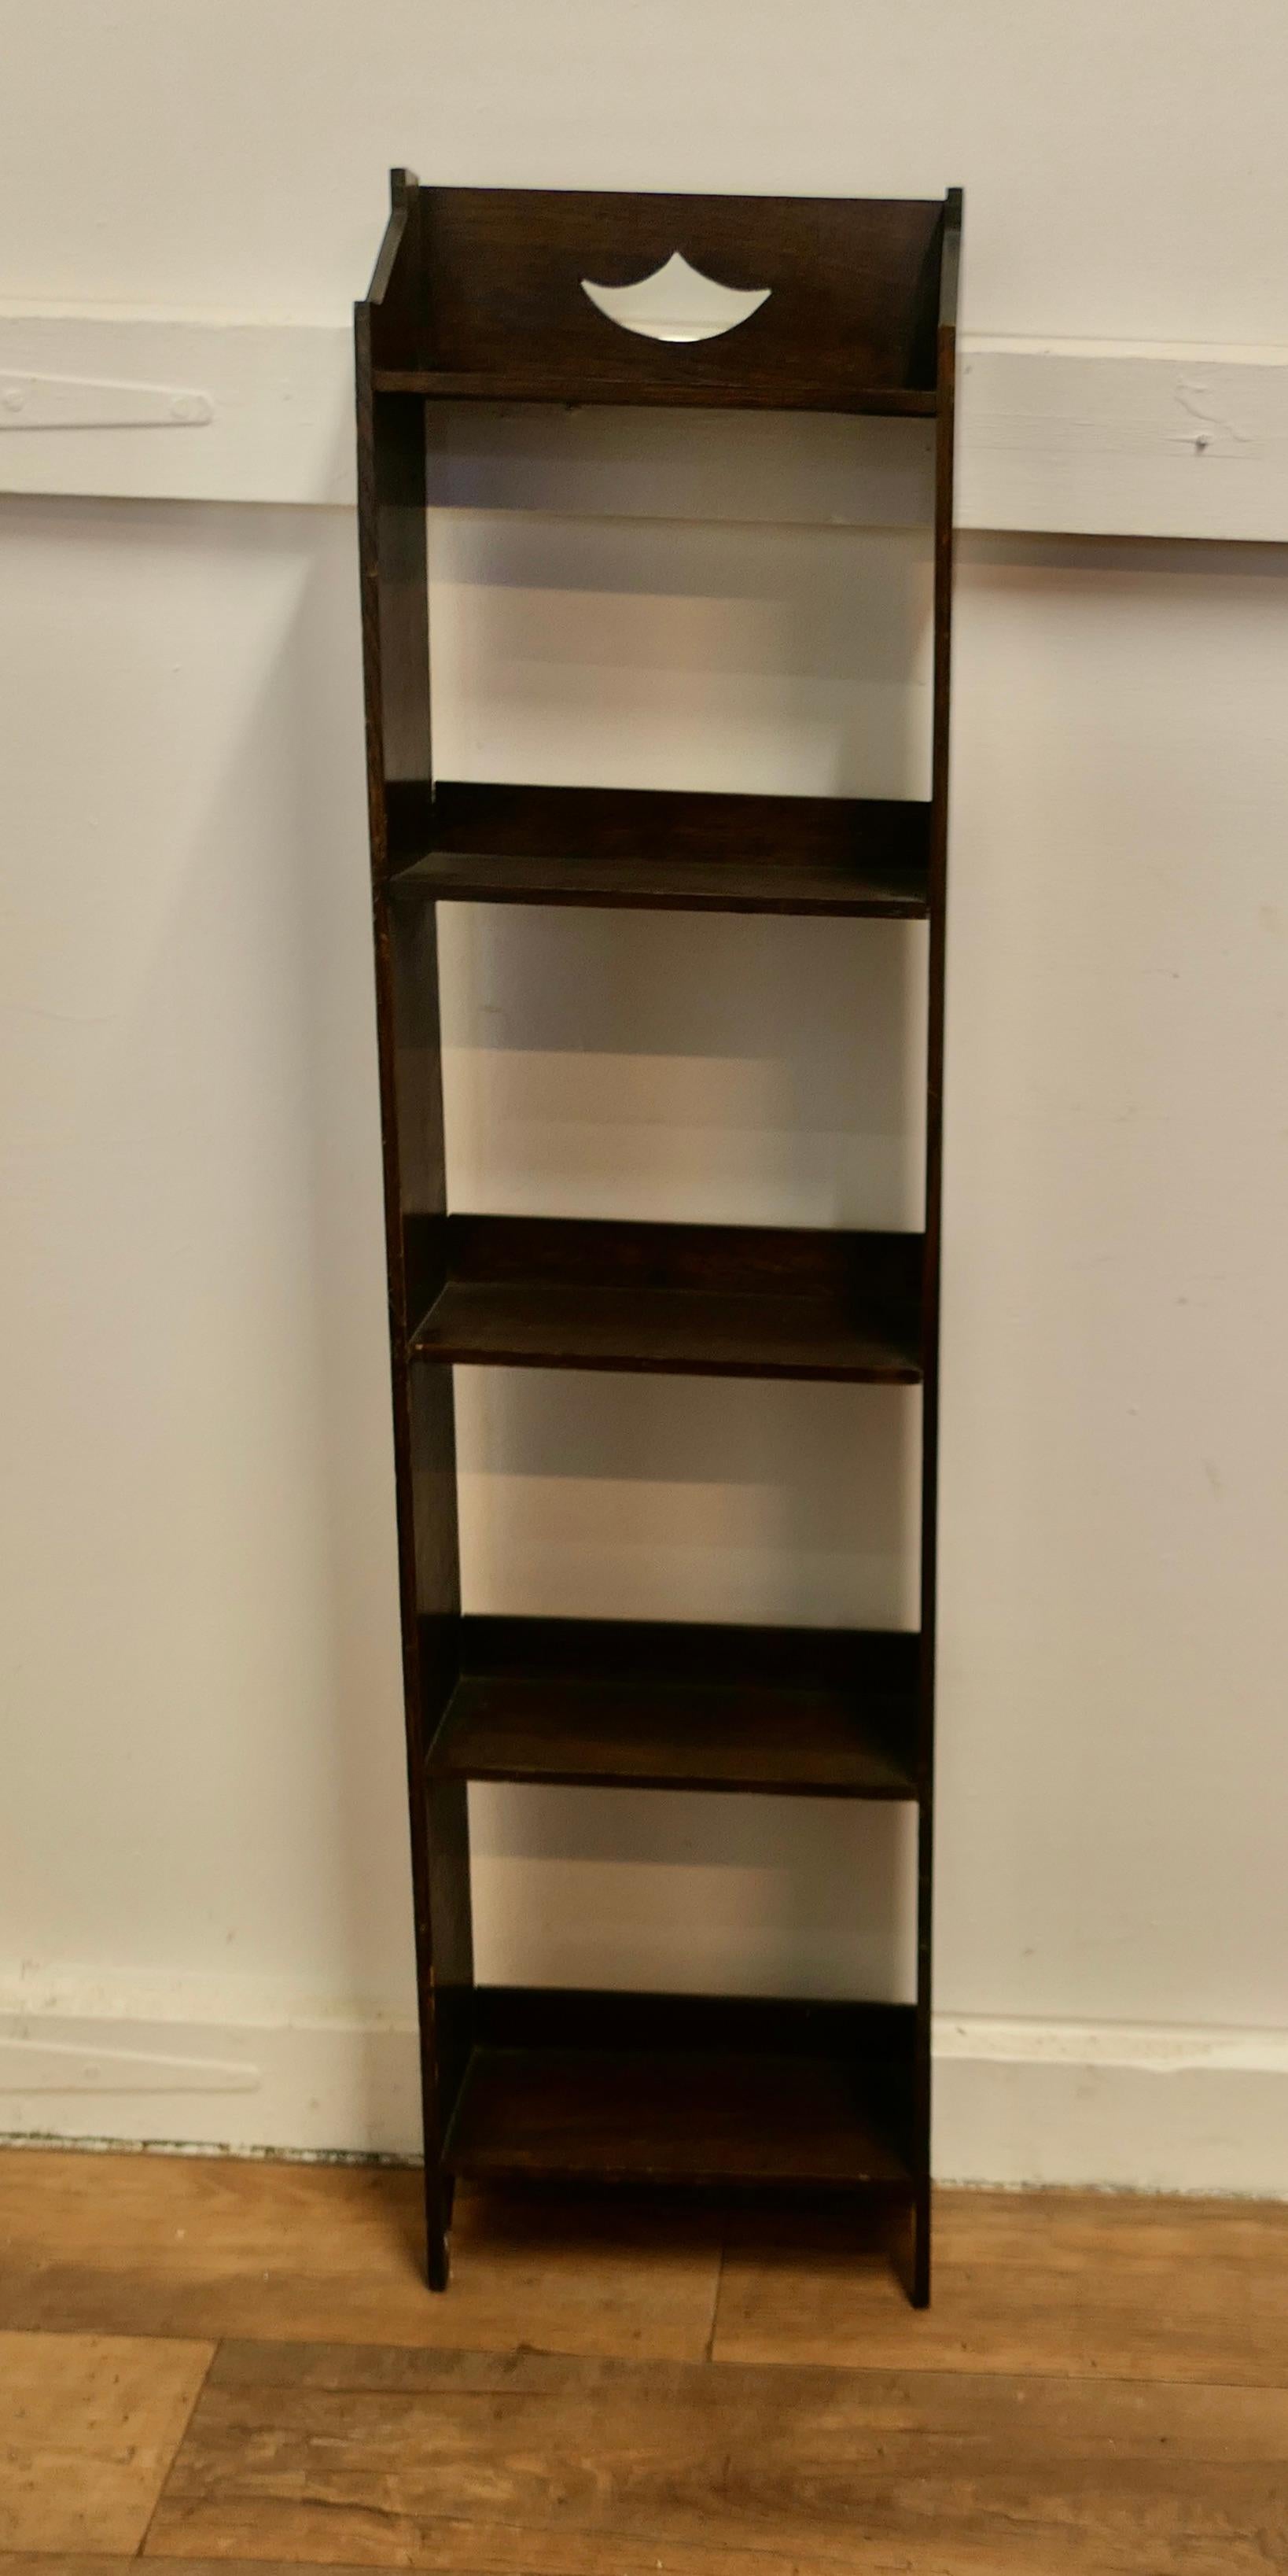 Arts and Crafts Tall Slim Open Front Oak Bookcase.

This Oak bookcase has 5 open shelves all with galleries at the back, tall and sturdy a lot of storage in a small space

The bookcase is in good attractive sturdy condition and would work very well